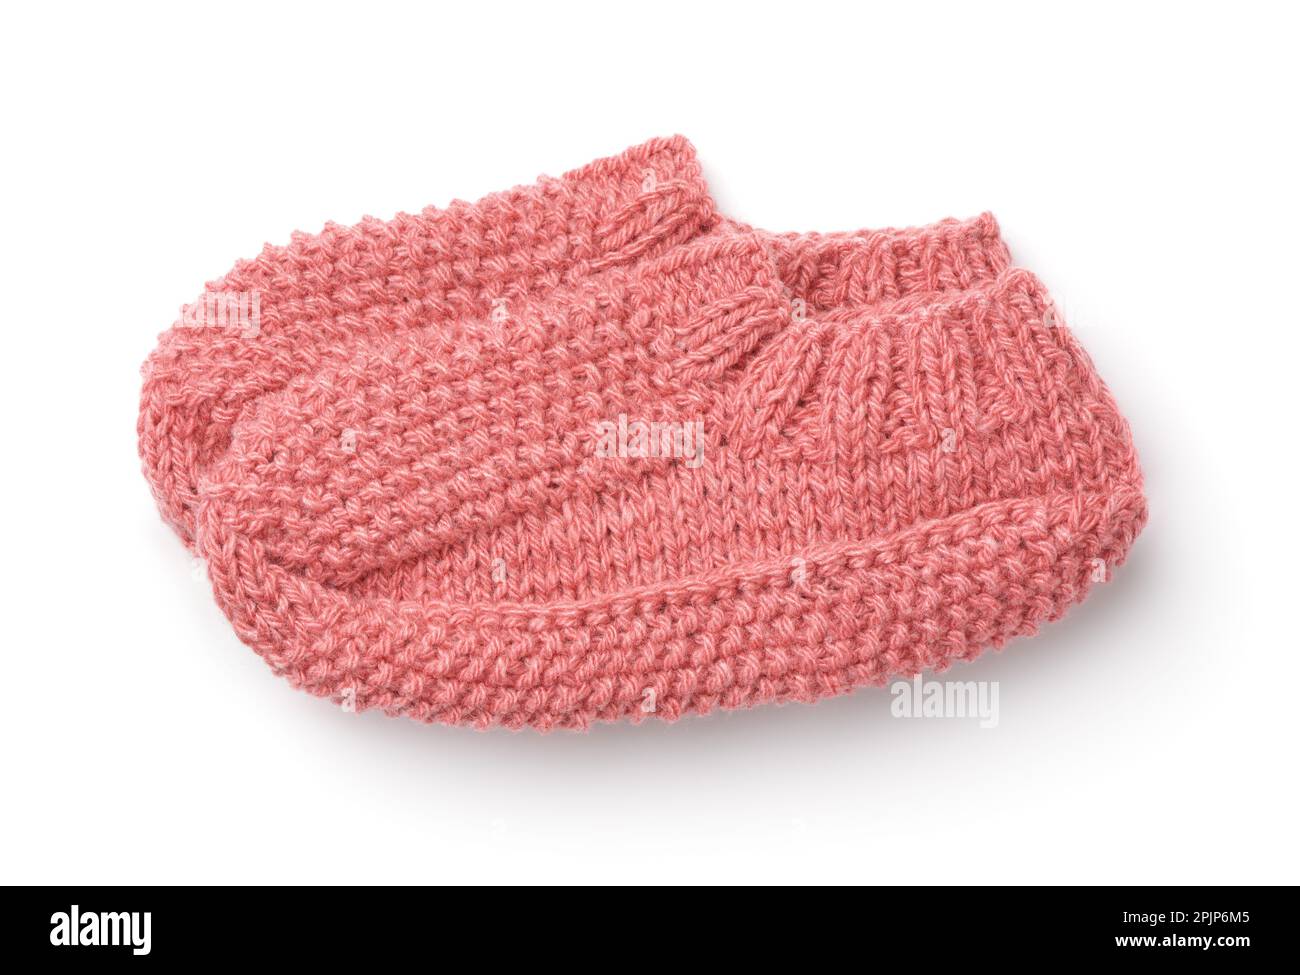 Side view of pink woolen hand knitted slipper socks isolated on white Stock Photo